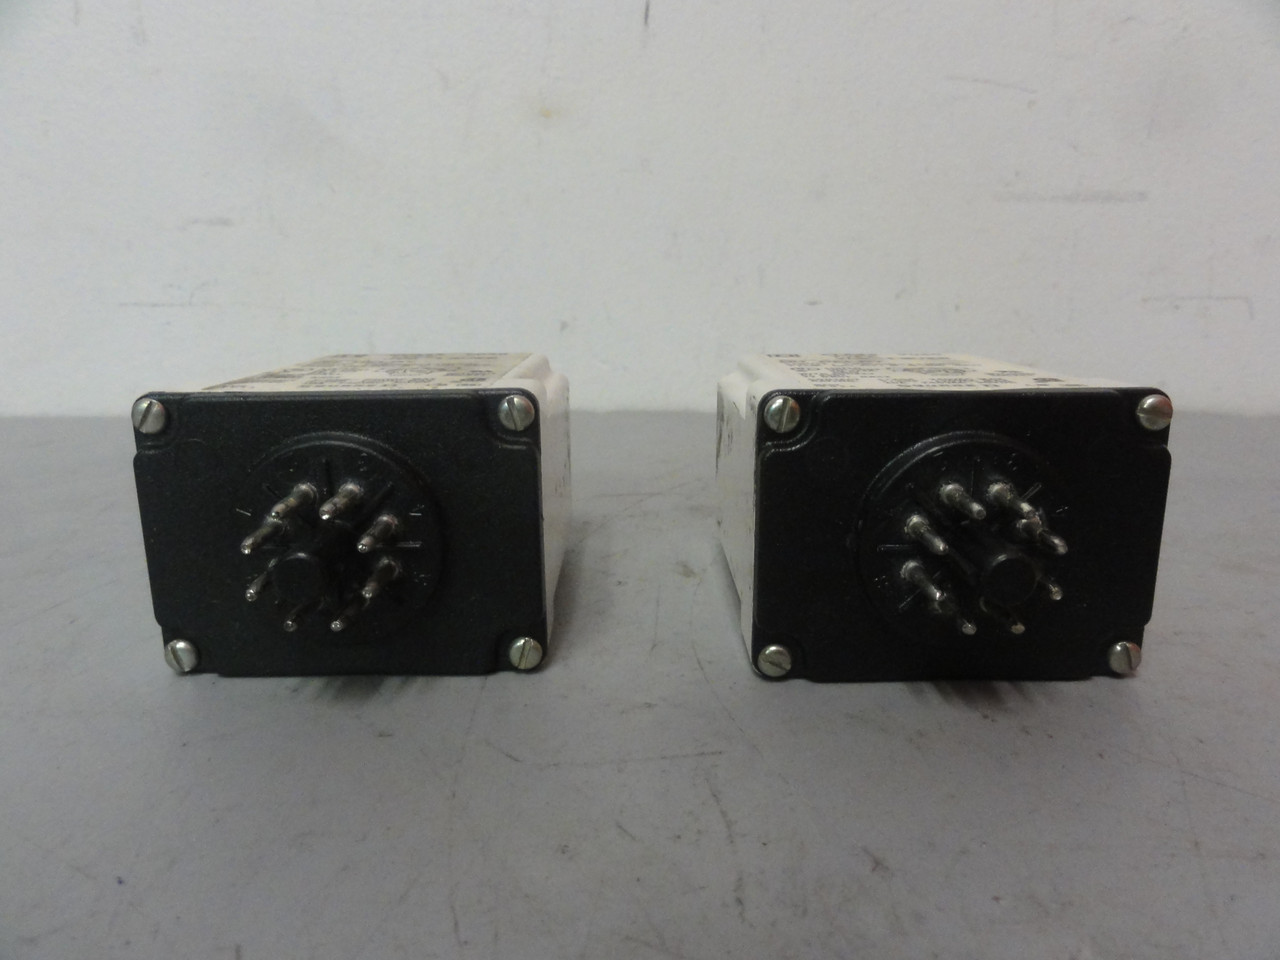 Square D Solid State Timing Relay Class 9050 Type JCK13V20 Series A (Lot of 2)